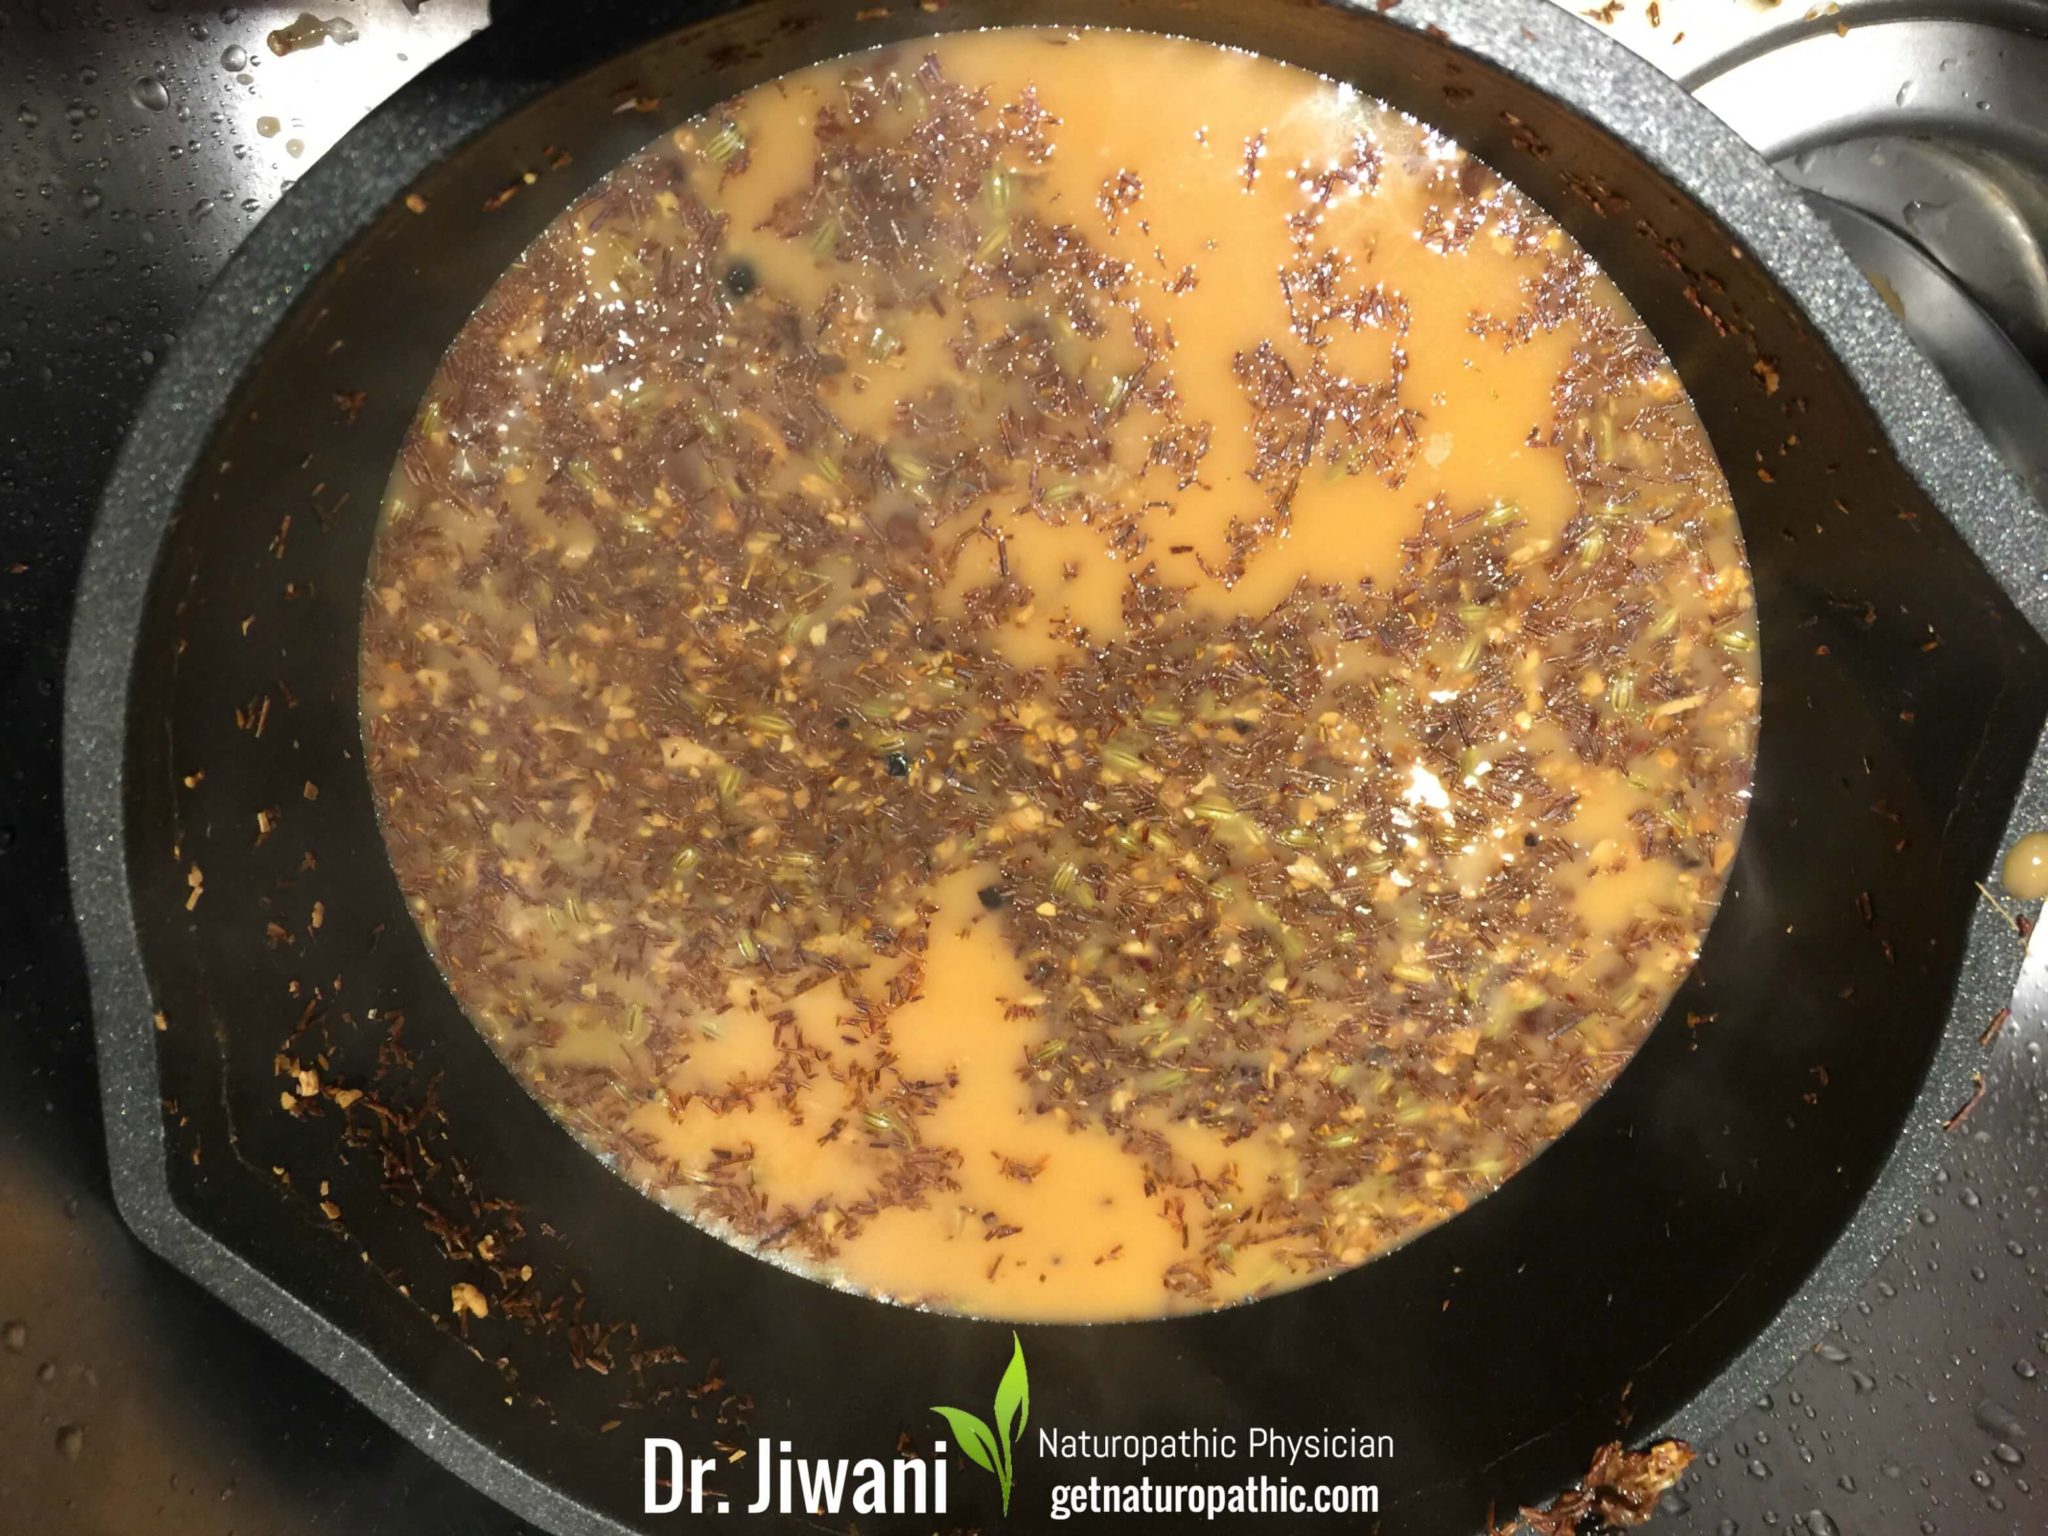 Dr. Jiwani's Caffeine-Free Chai Latte provides the comfort of a latte with the kick of Indian Spices, yet Low Carb, Gluten-Free, Egg-Free, Dairy-Free, Soy-Free, Corn-Free, Ideal For Paleo, Keto, Vegan & Allergy-Free Diets | Dr. Jiwani's Naturopathic Nuggets Blog